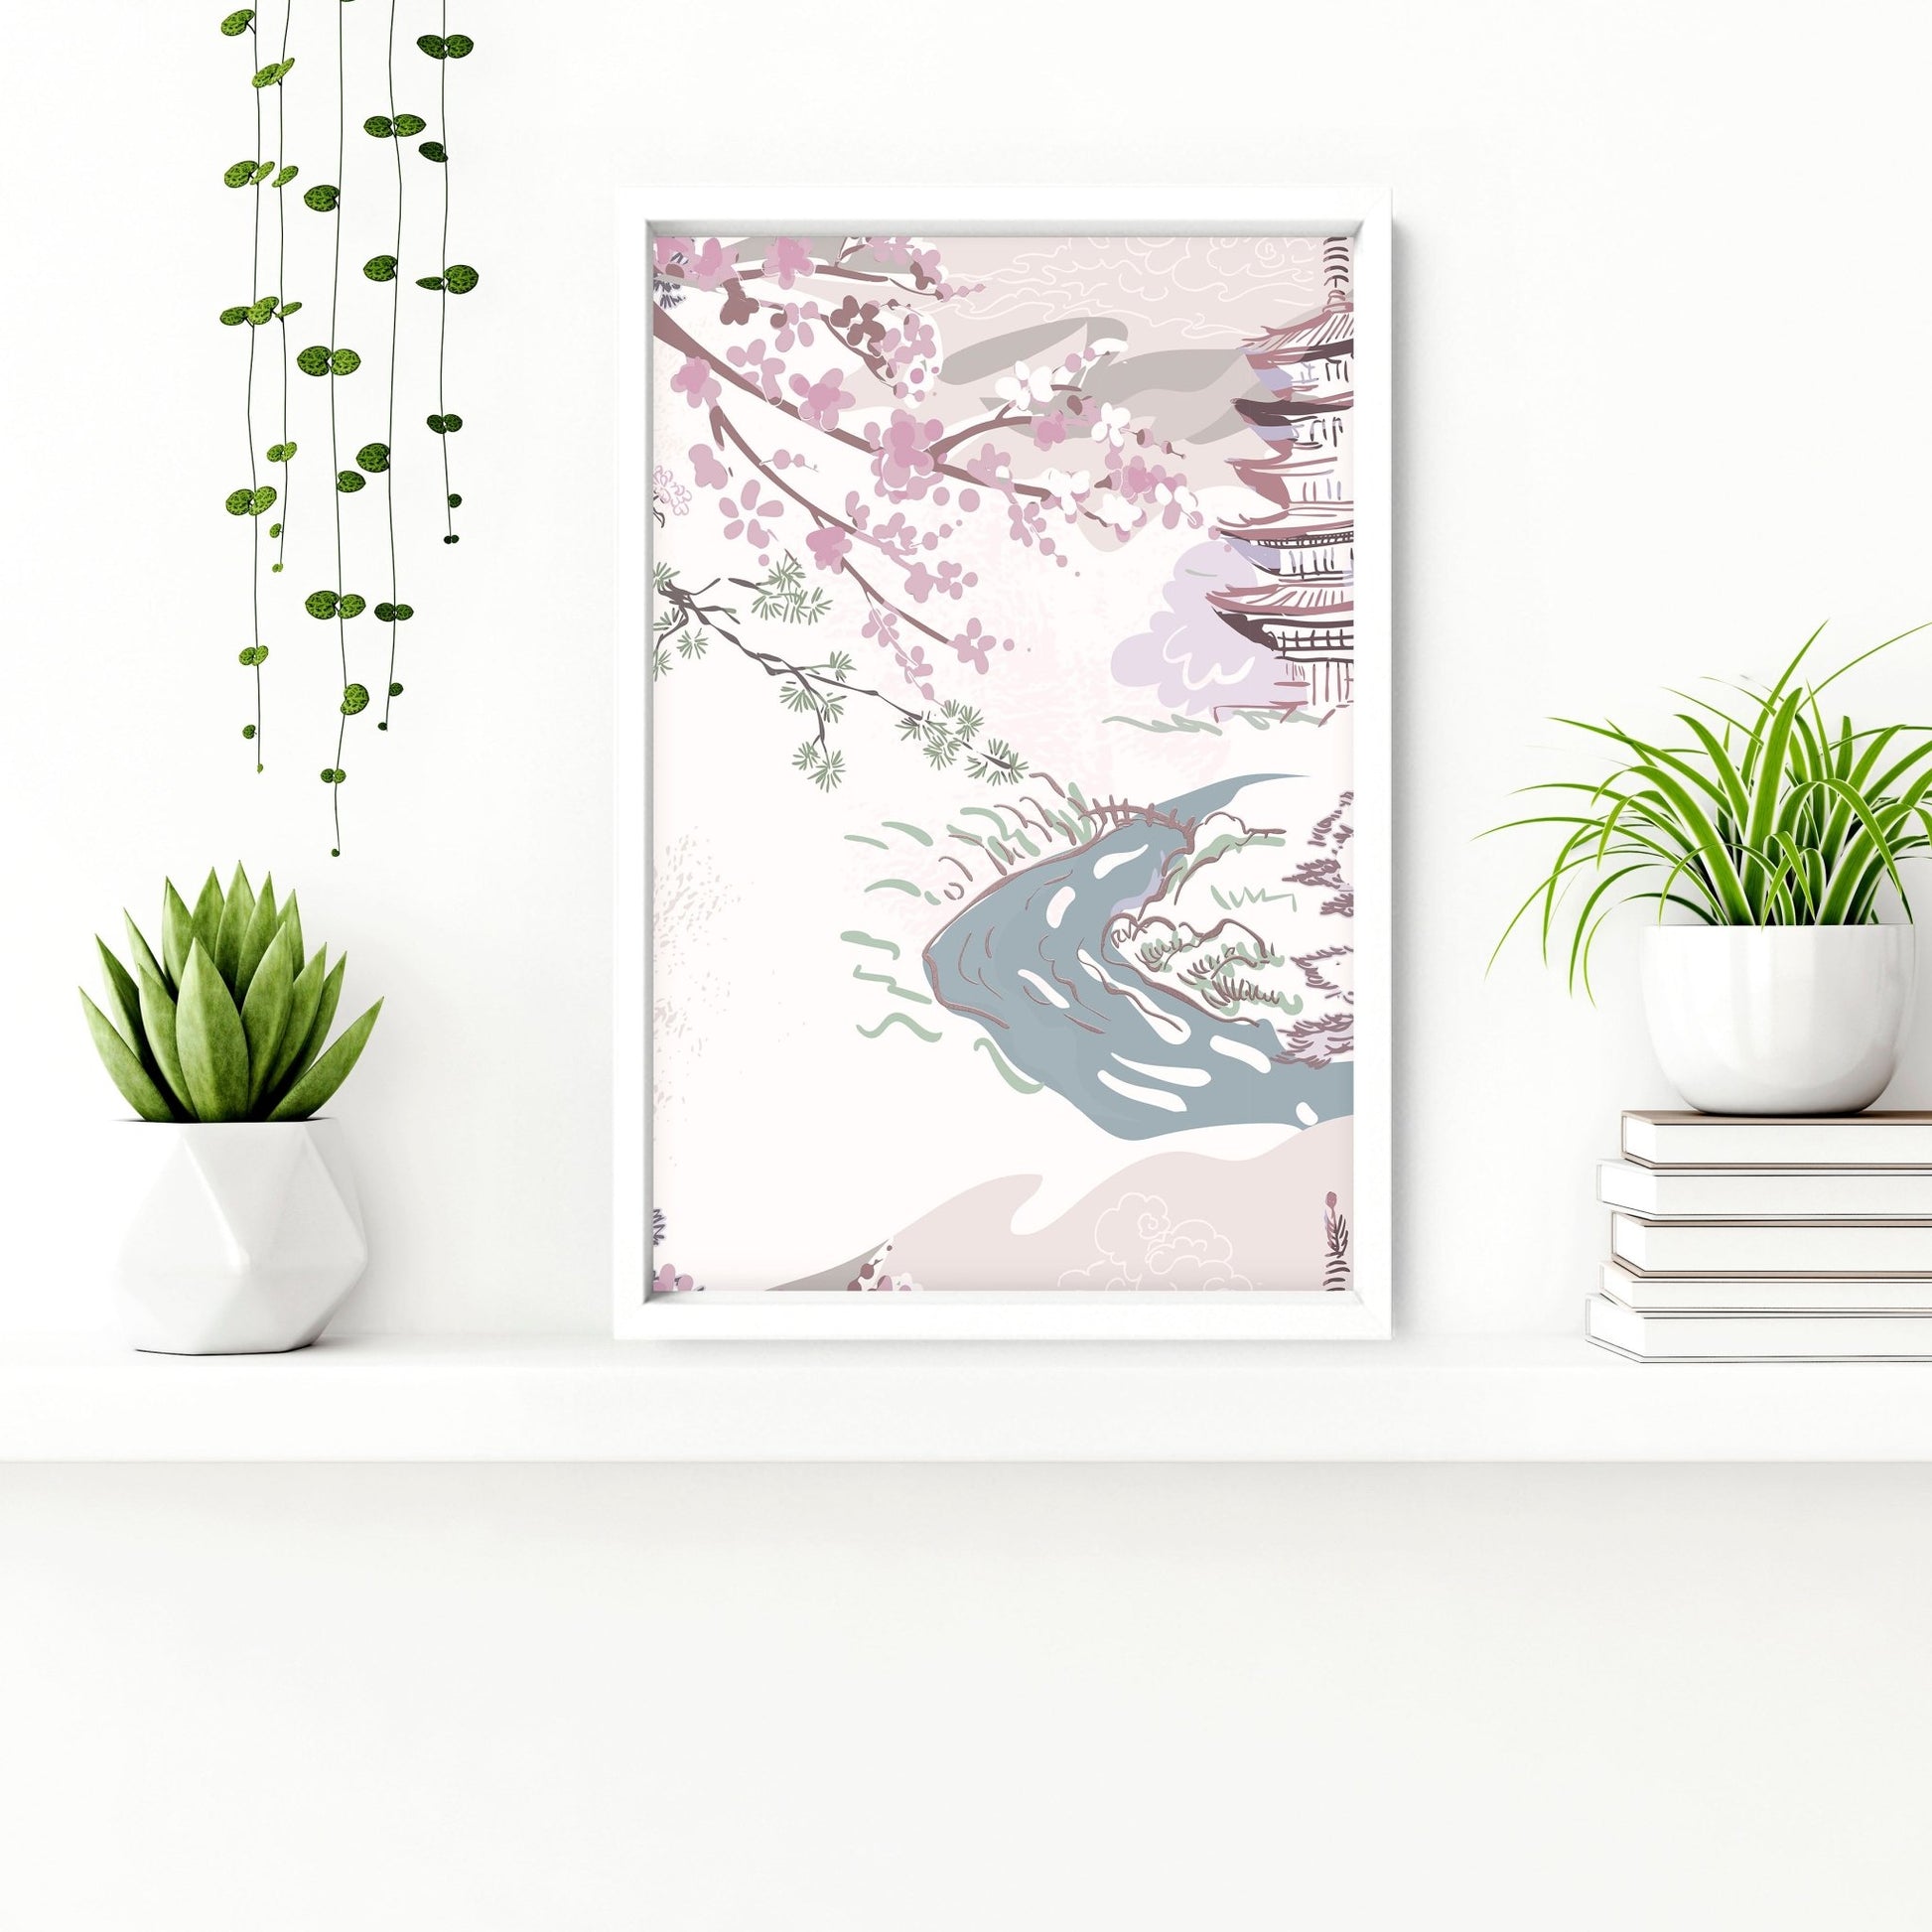 Art for a bathroom | set of 3 wall prints - About Wall Art